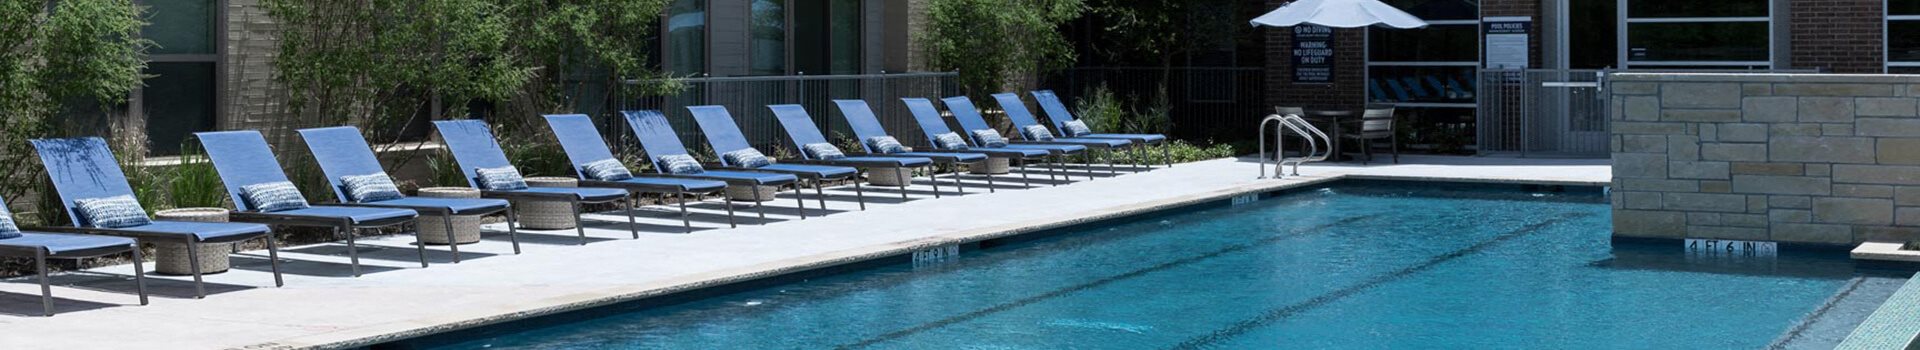 pool deck with chairs